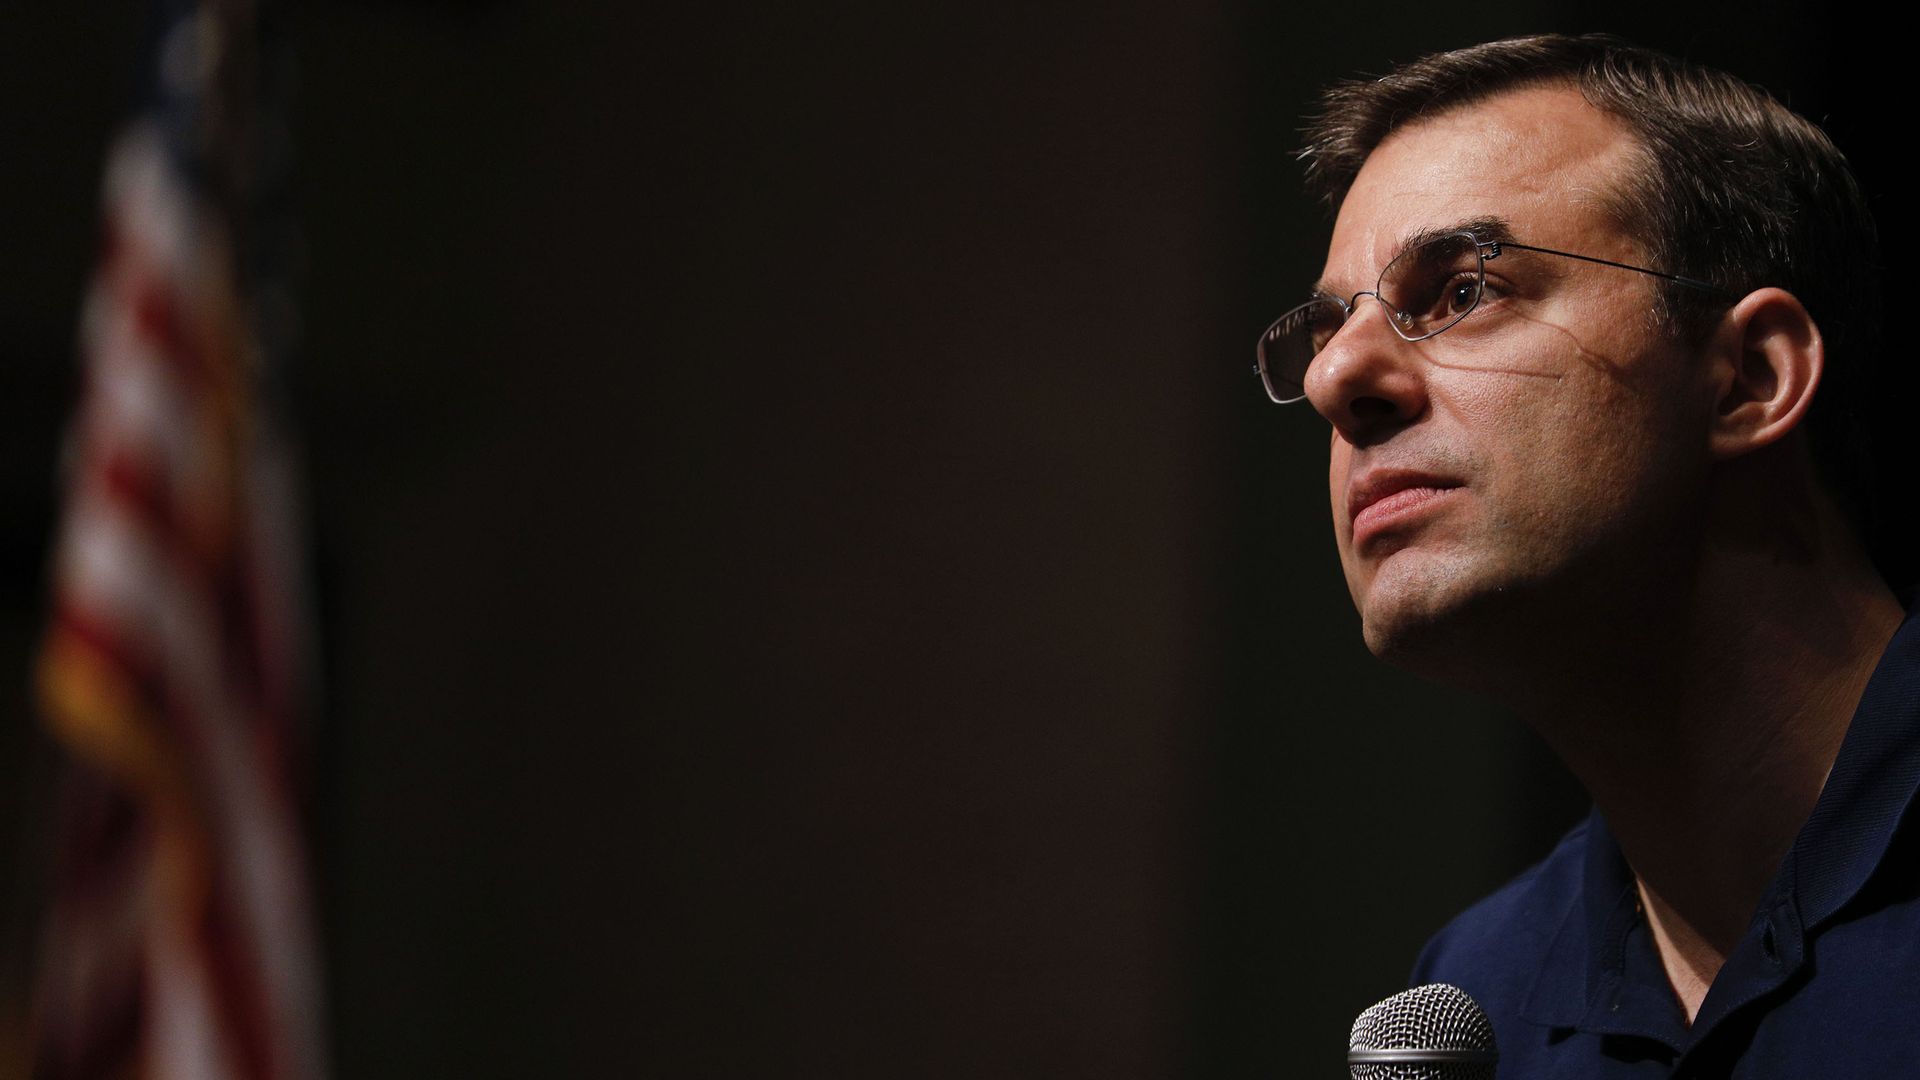  Rep. Justin Amash (R-MI) holds a Town Hall Meeting on May 28, 2019 in Grand Rapids, Michigan